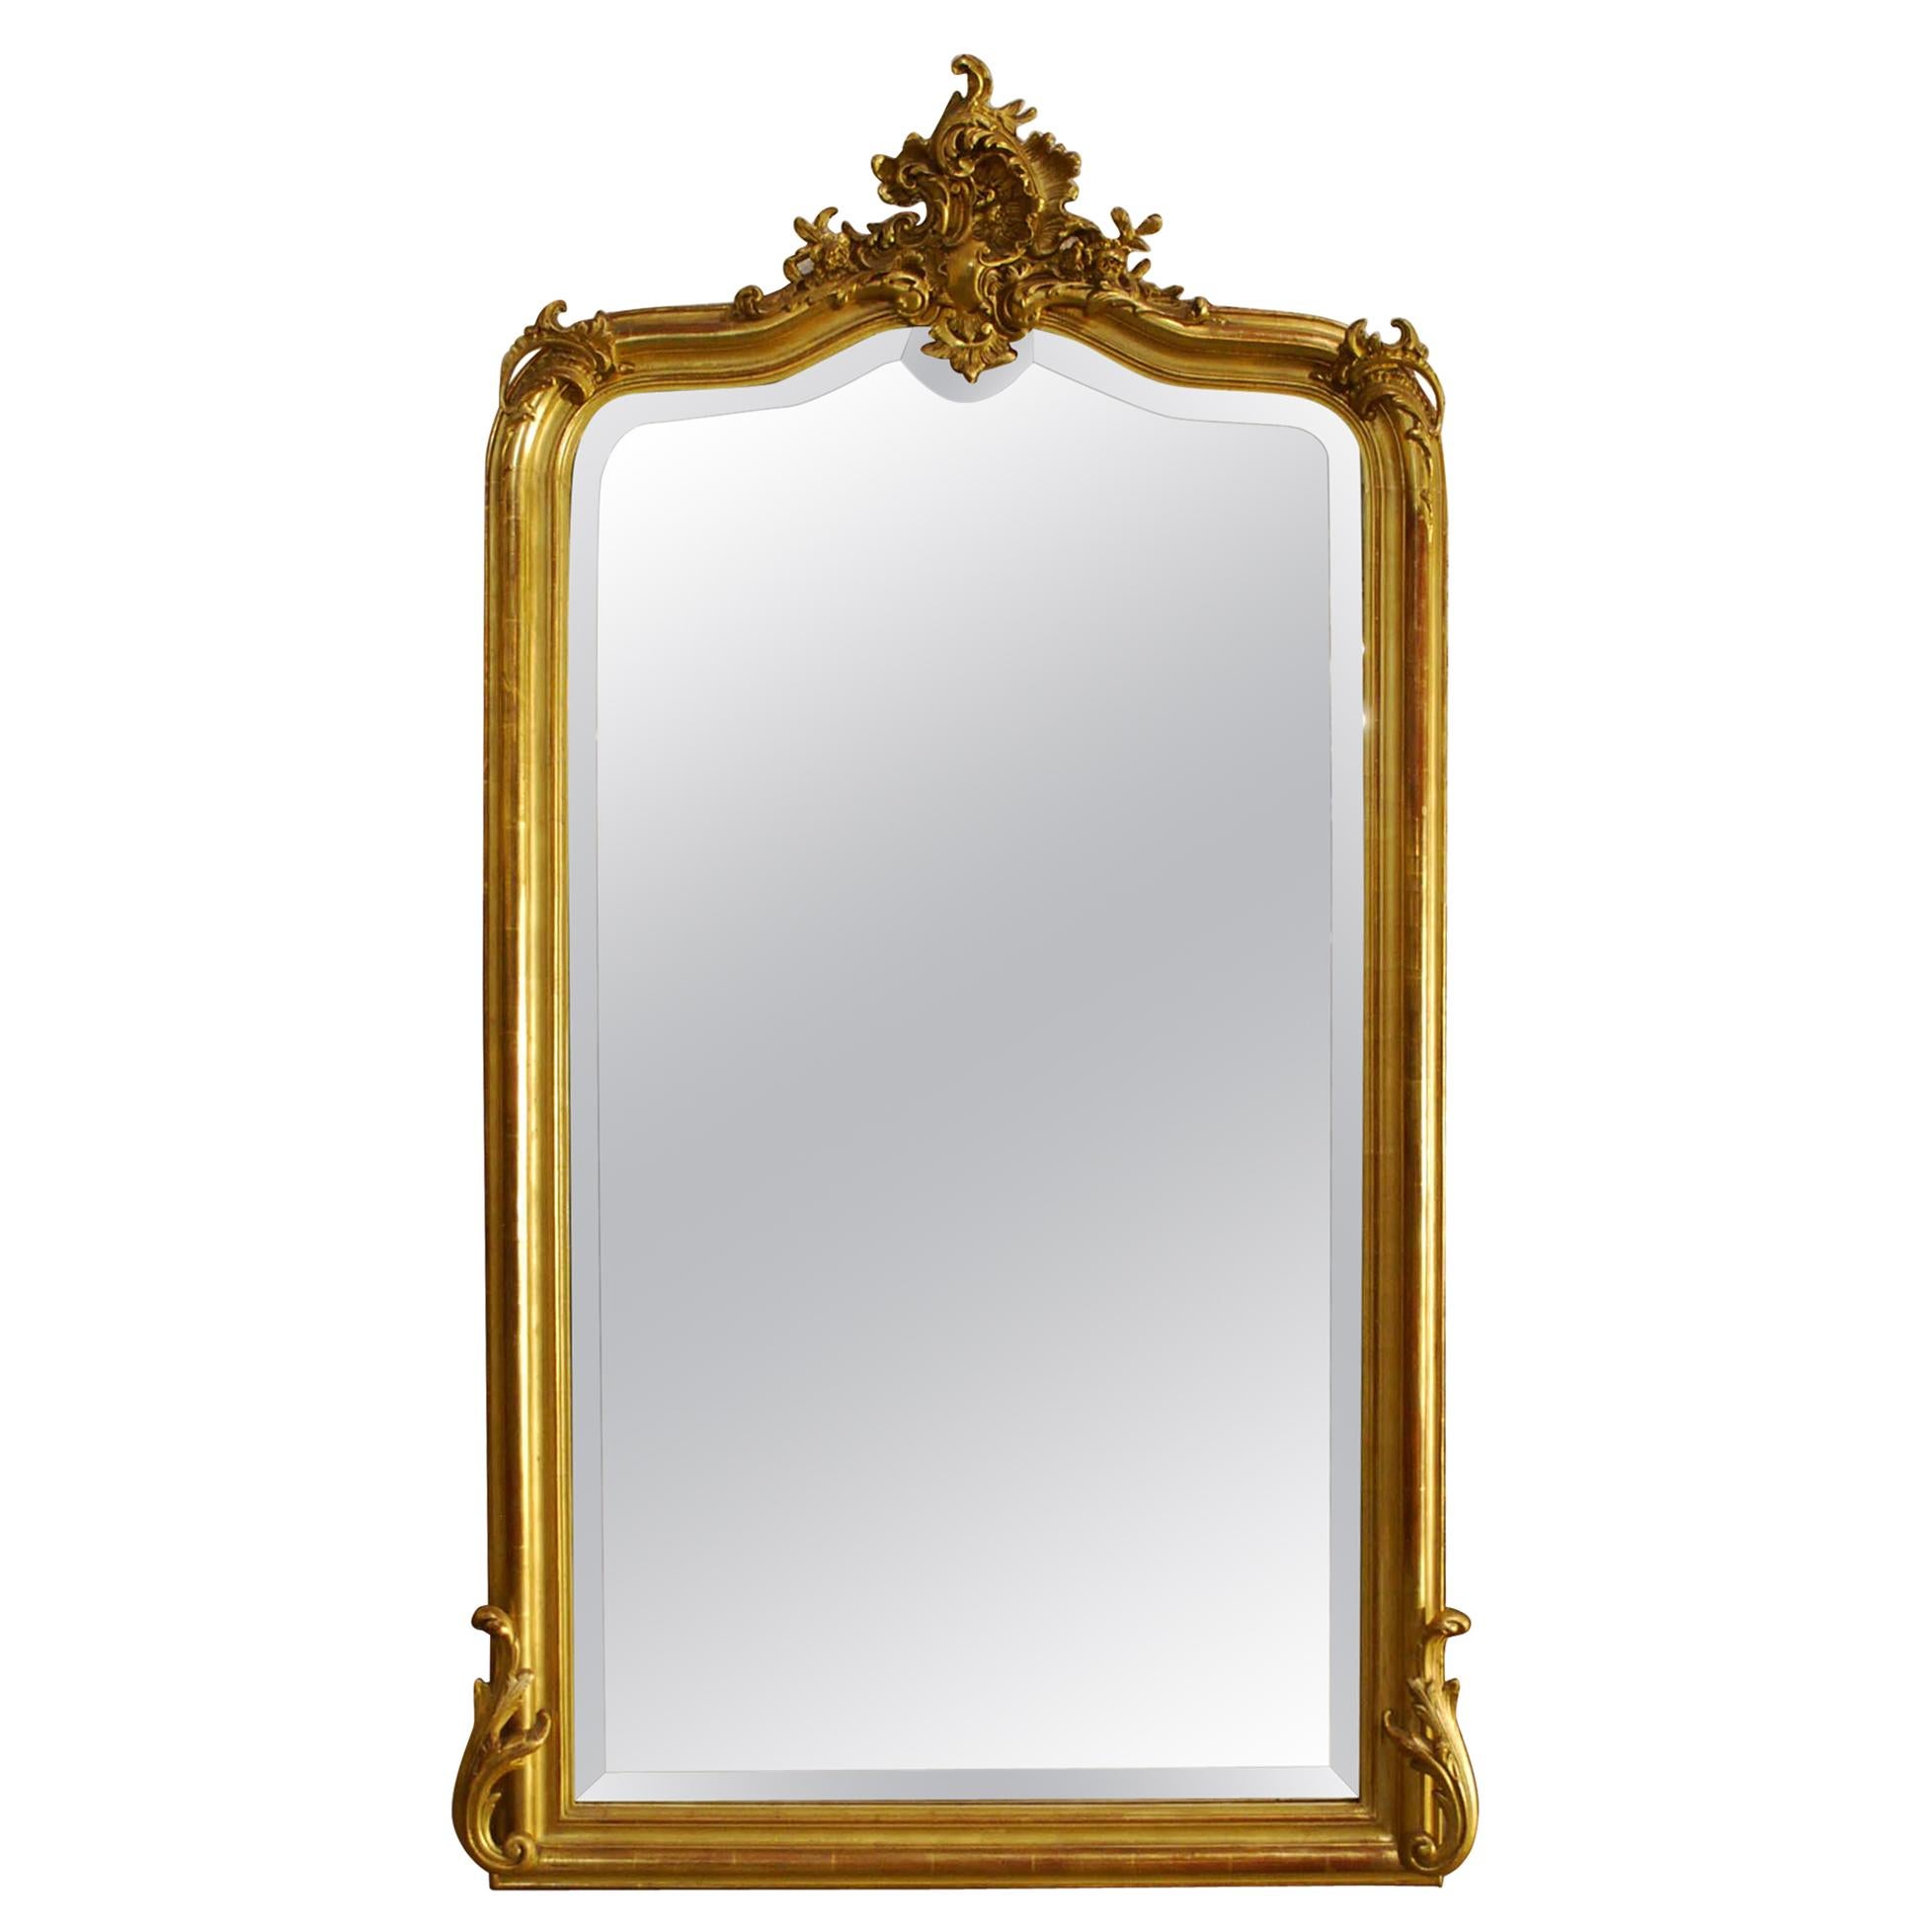 Antique French Louis Quinze or Rococo Gold Gilt Mirror